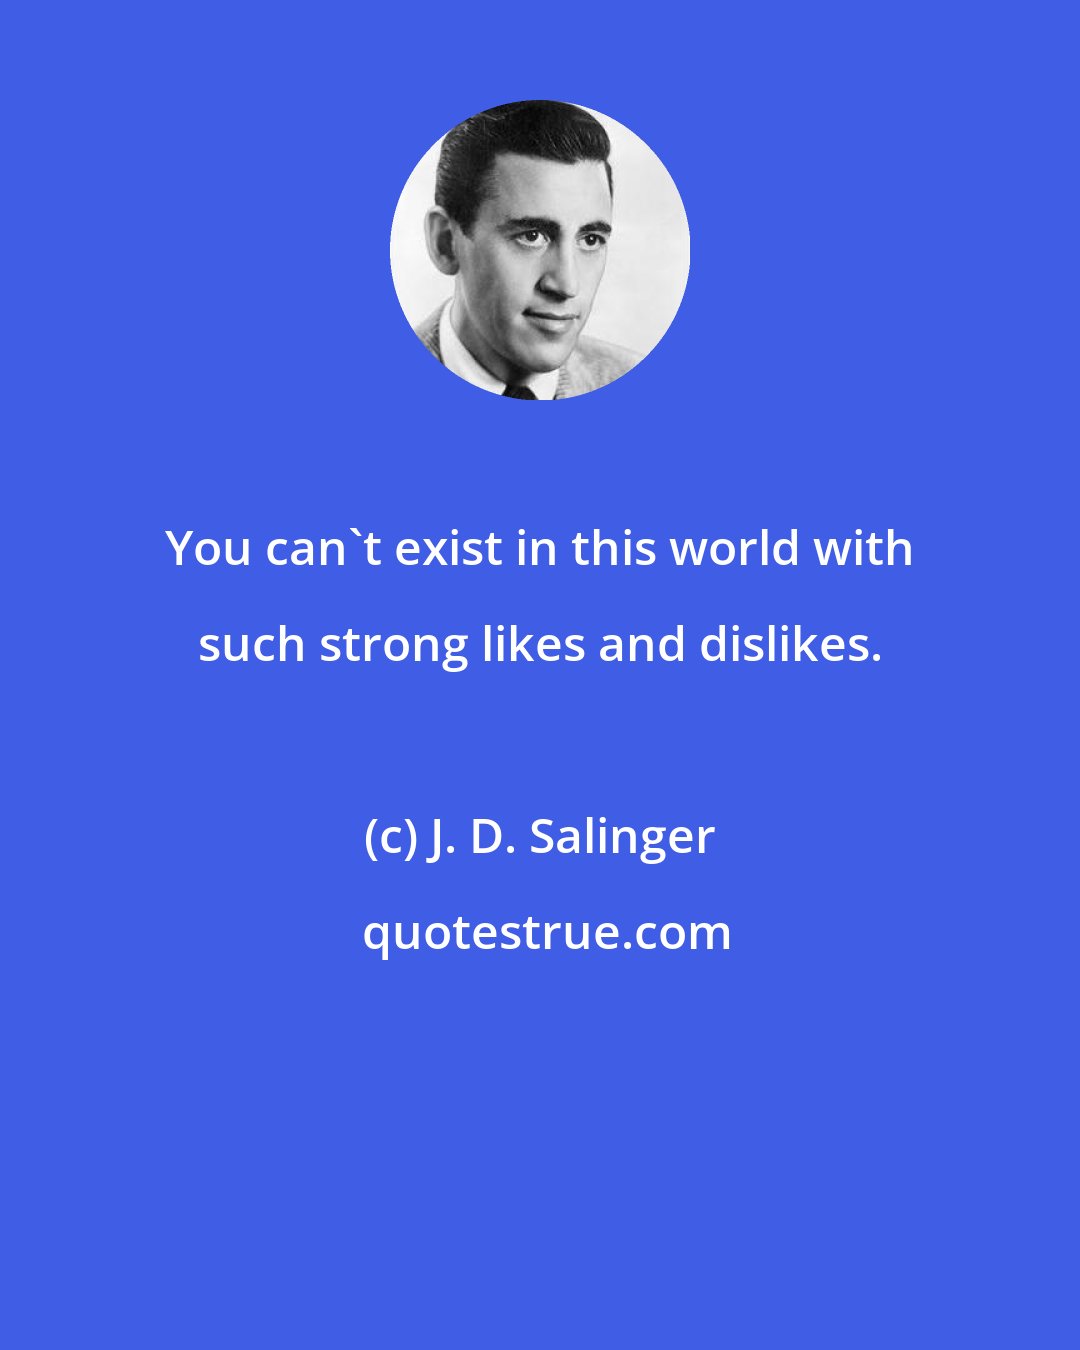 J. D. Salinger: You can't exist in this world with such strong likes and dislikes.